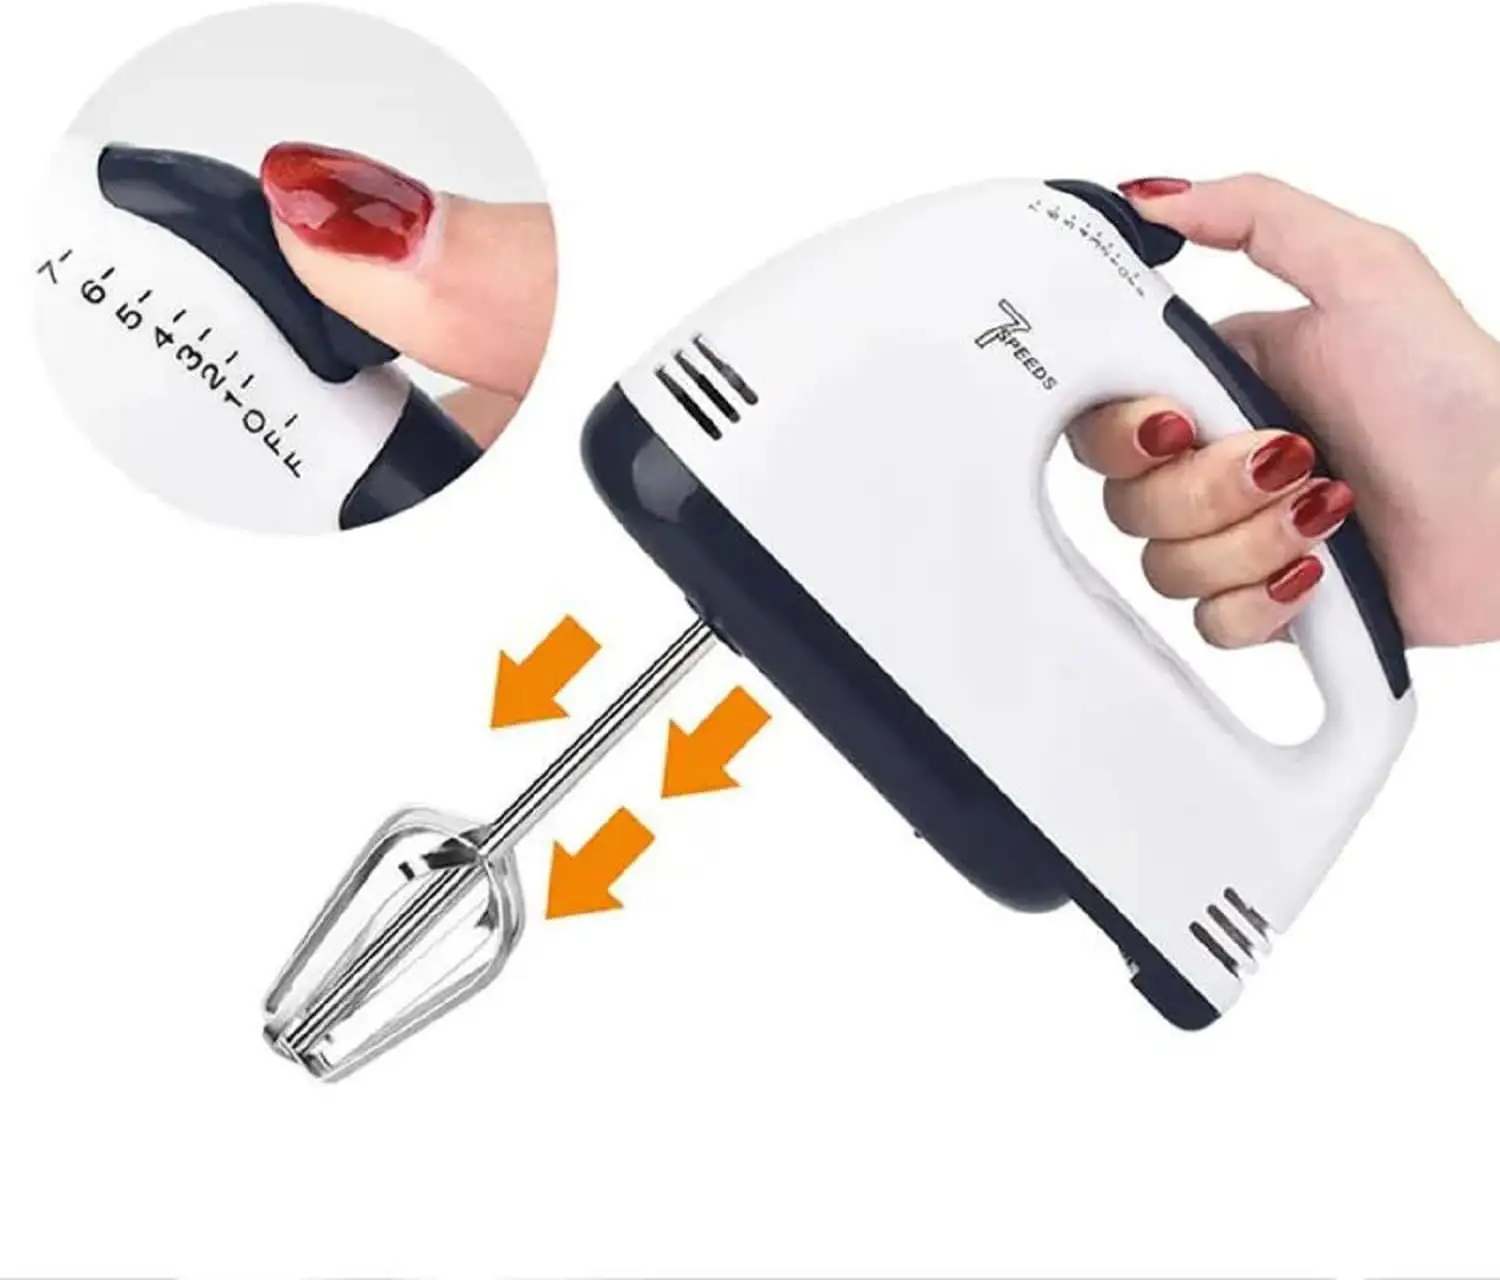 220V 100W 7 Speed Home Kitchen Egg Beater Hand blender Electric Hand Mixer With Whisk